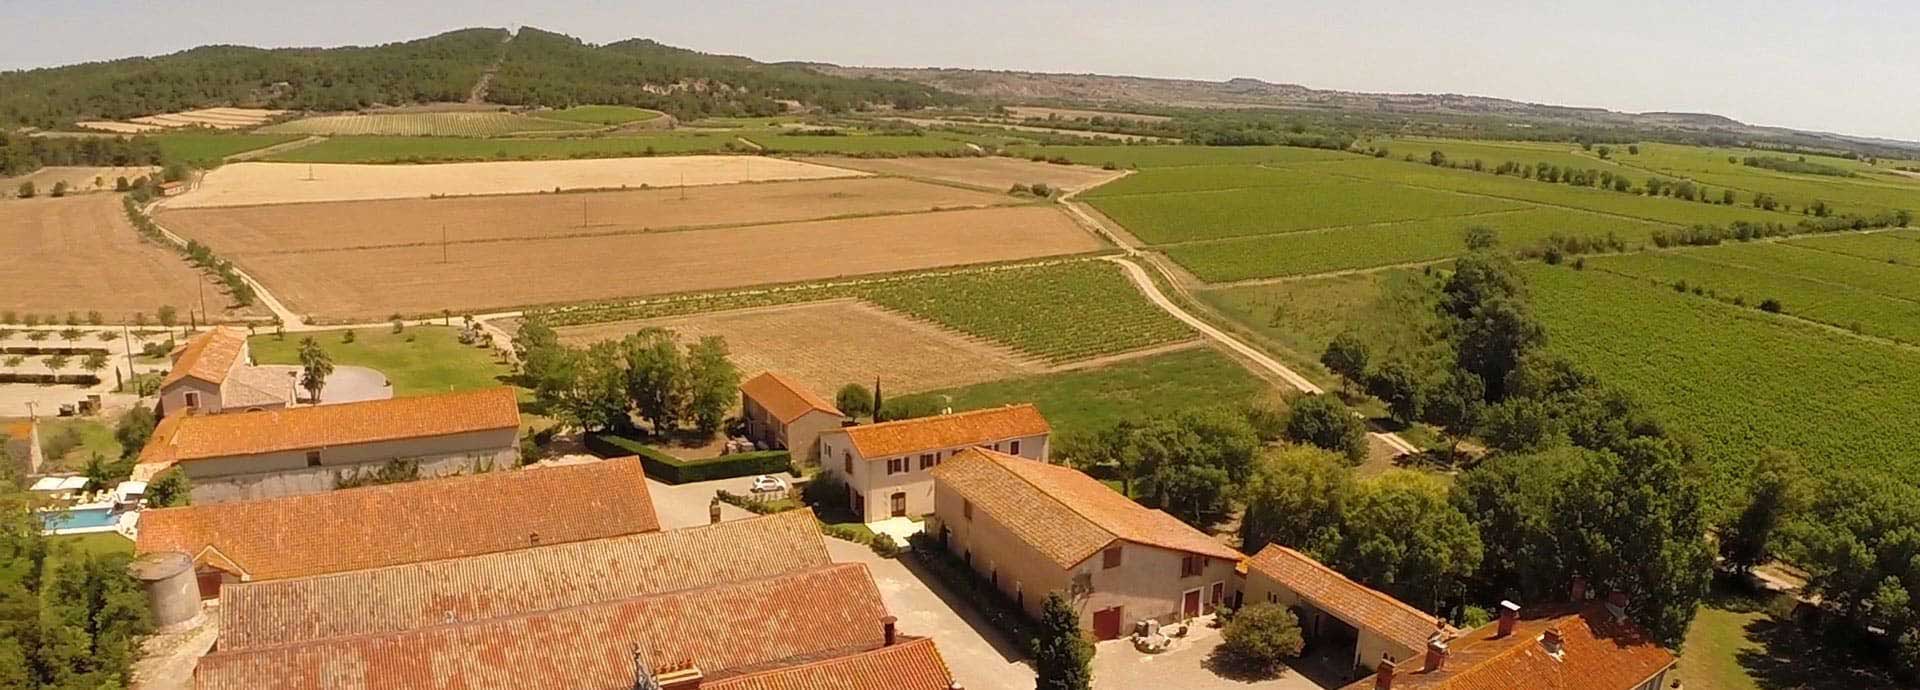 View of Domaine de la Vernède, holiday rental in the Hérault Department, from the air